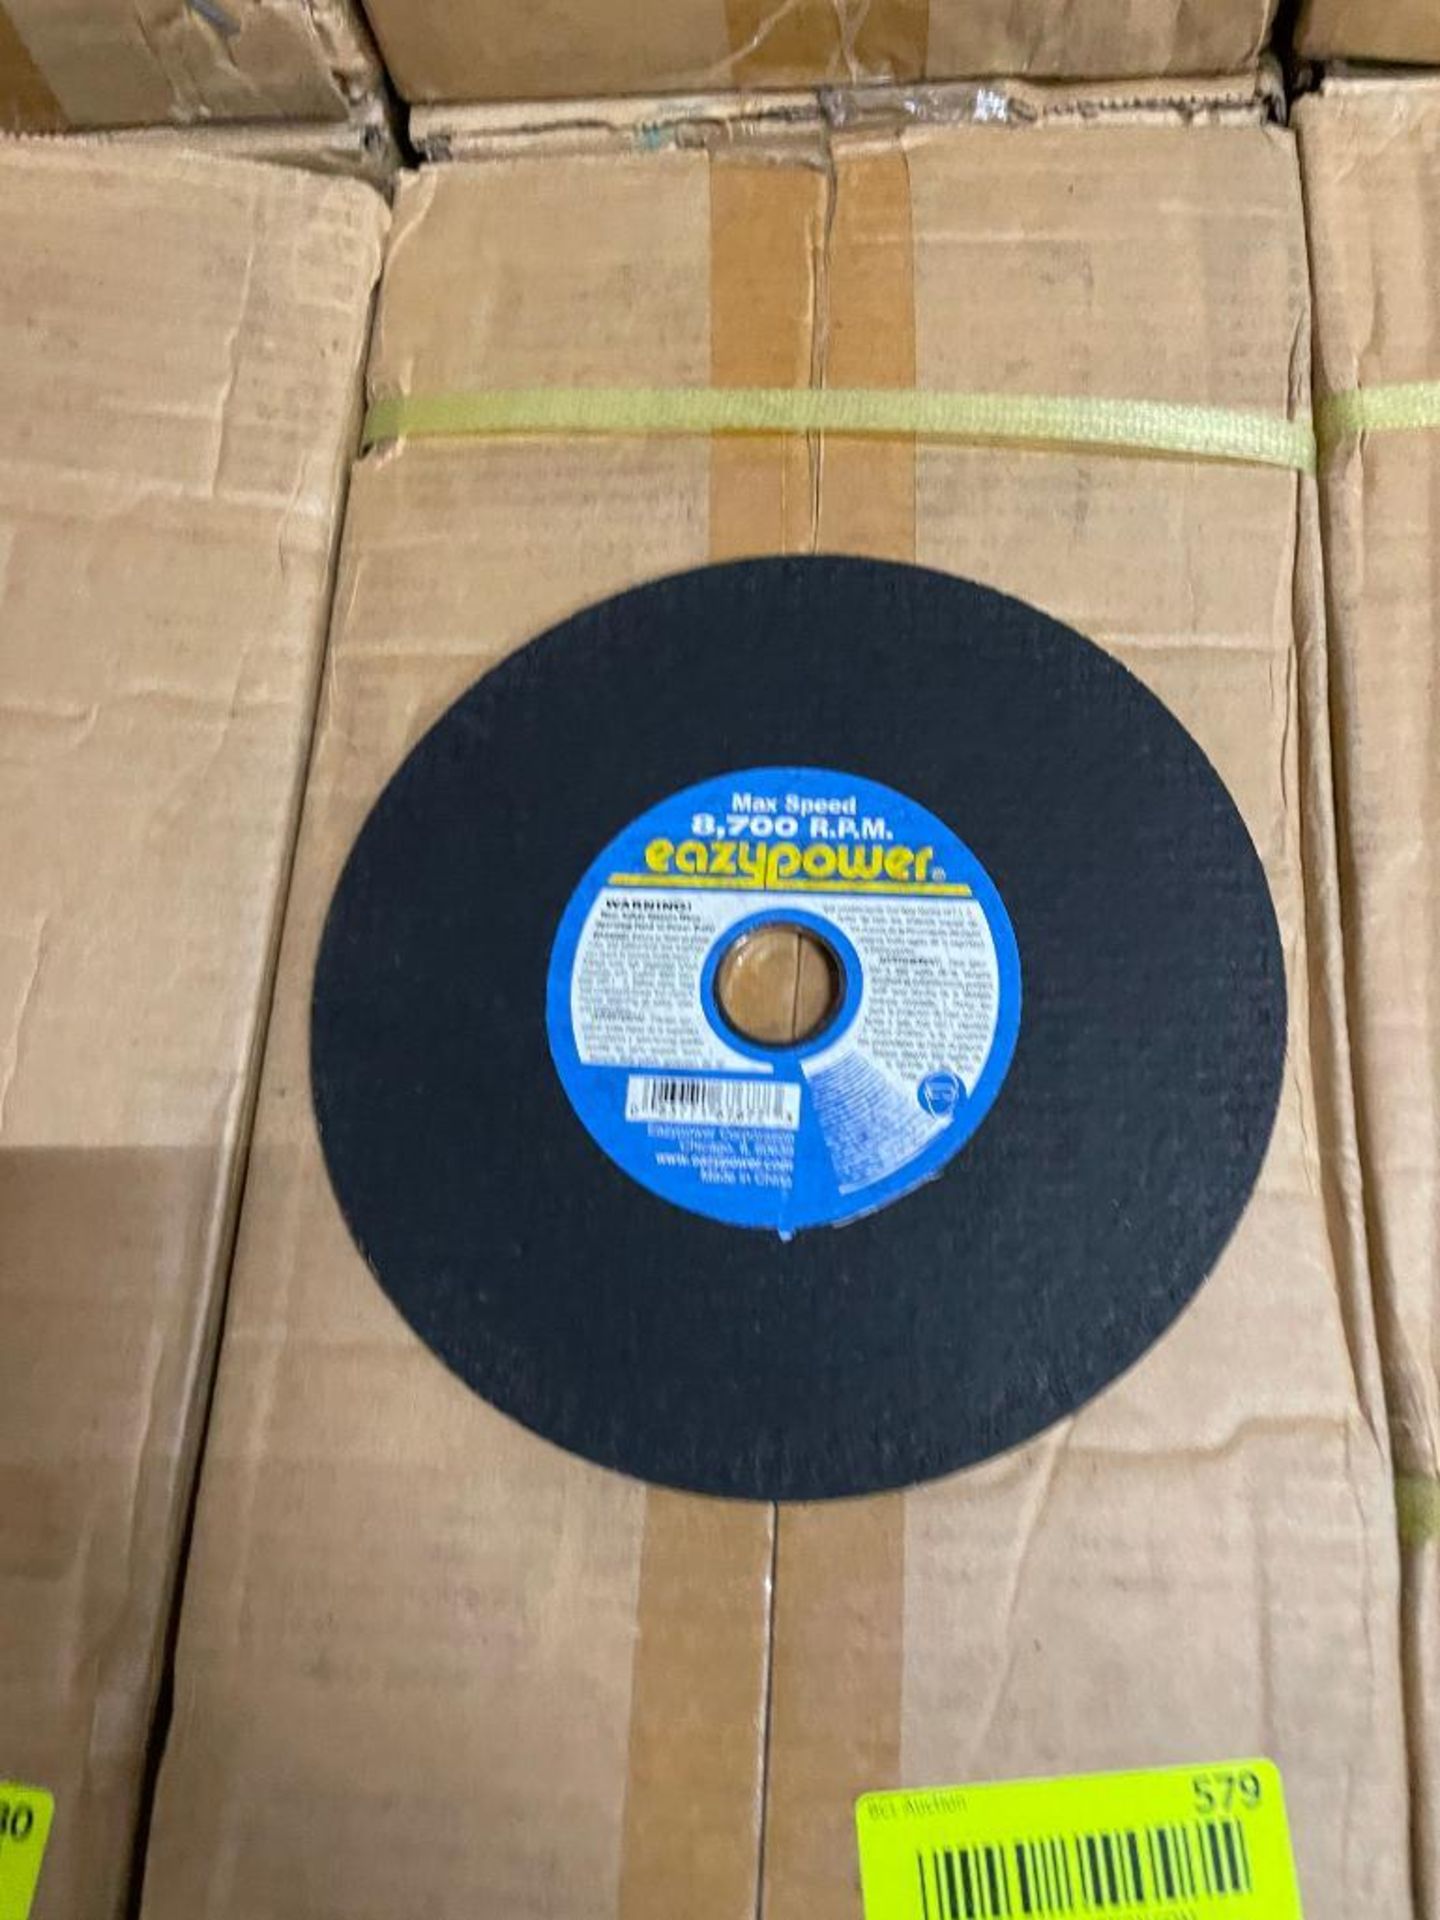 200CT OF 7" SILICON CARBIDE CUTTING ABRASIVE BLADES BRAND/MODEL EAZYPOWER 87677 ADDITIONAL INFO TOTA - Image 3 of 4